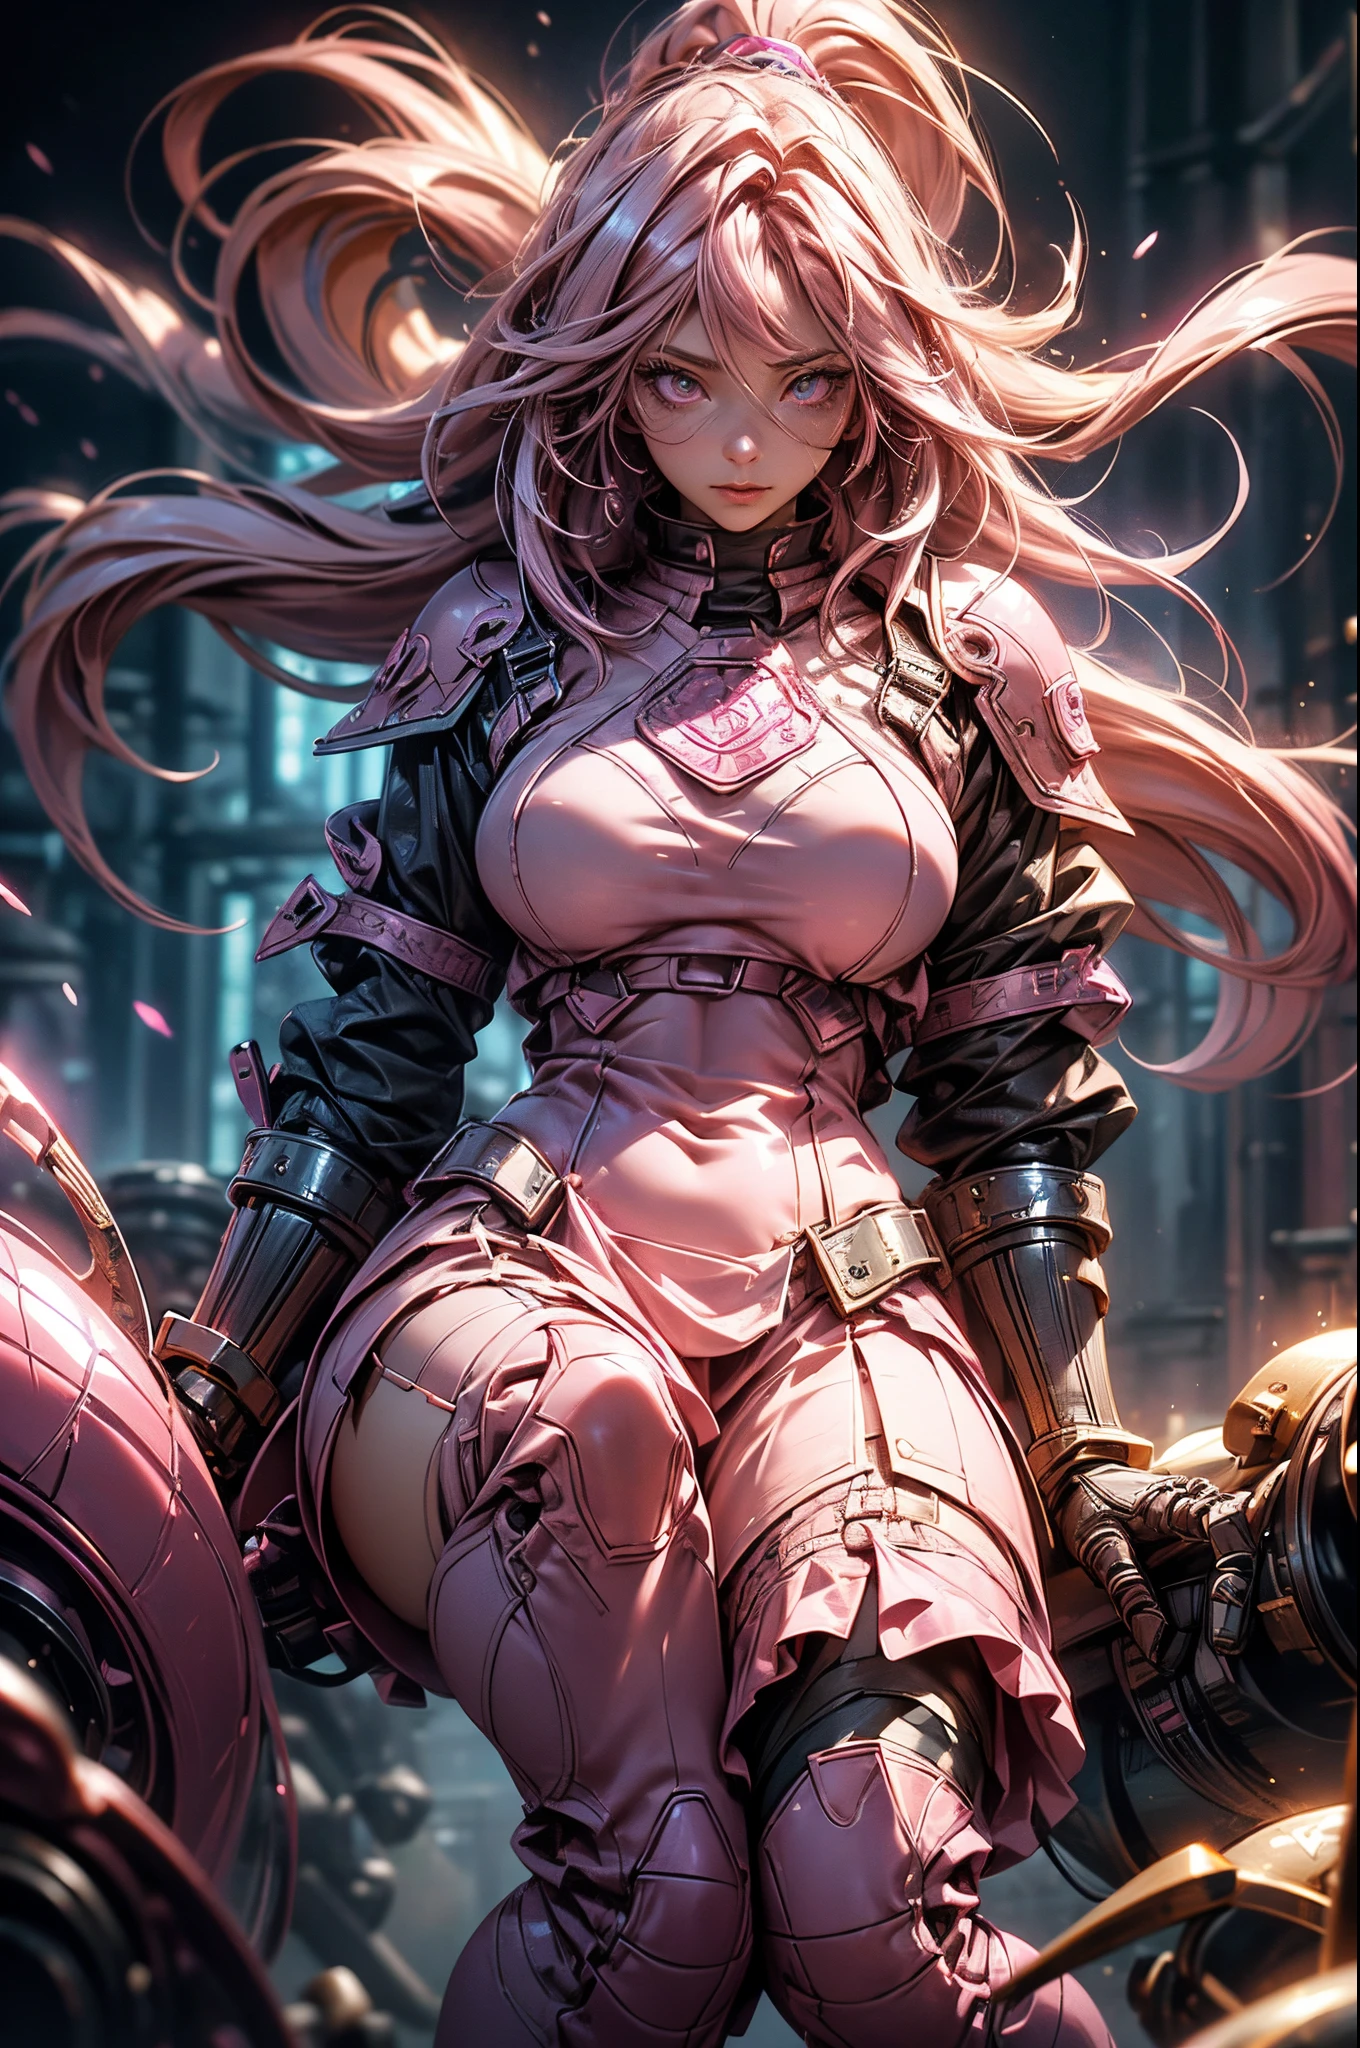 a pinkhaired scandinavian girl with half plate armor and frilly skirt over a skintight bodysuit, (Long pink Hair:1.4), pink Eyes, HDR (High Dynamic Range), Ray Tracing, NVIDIA RTX, Super-Resolution, Subsurface Scattering, Anisotropic Filtering, Depth-Of-Field ,Maximum Clarity And Sharpness, Surface Shading, Two-Tone Lighting